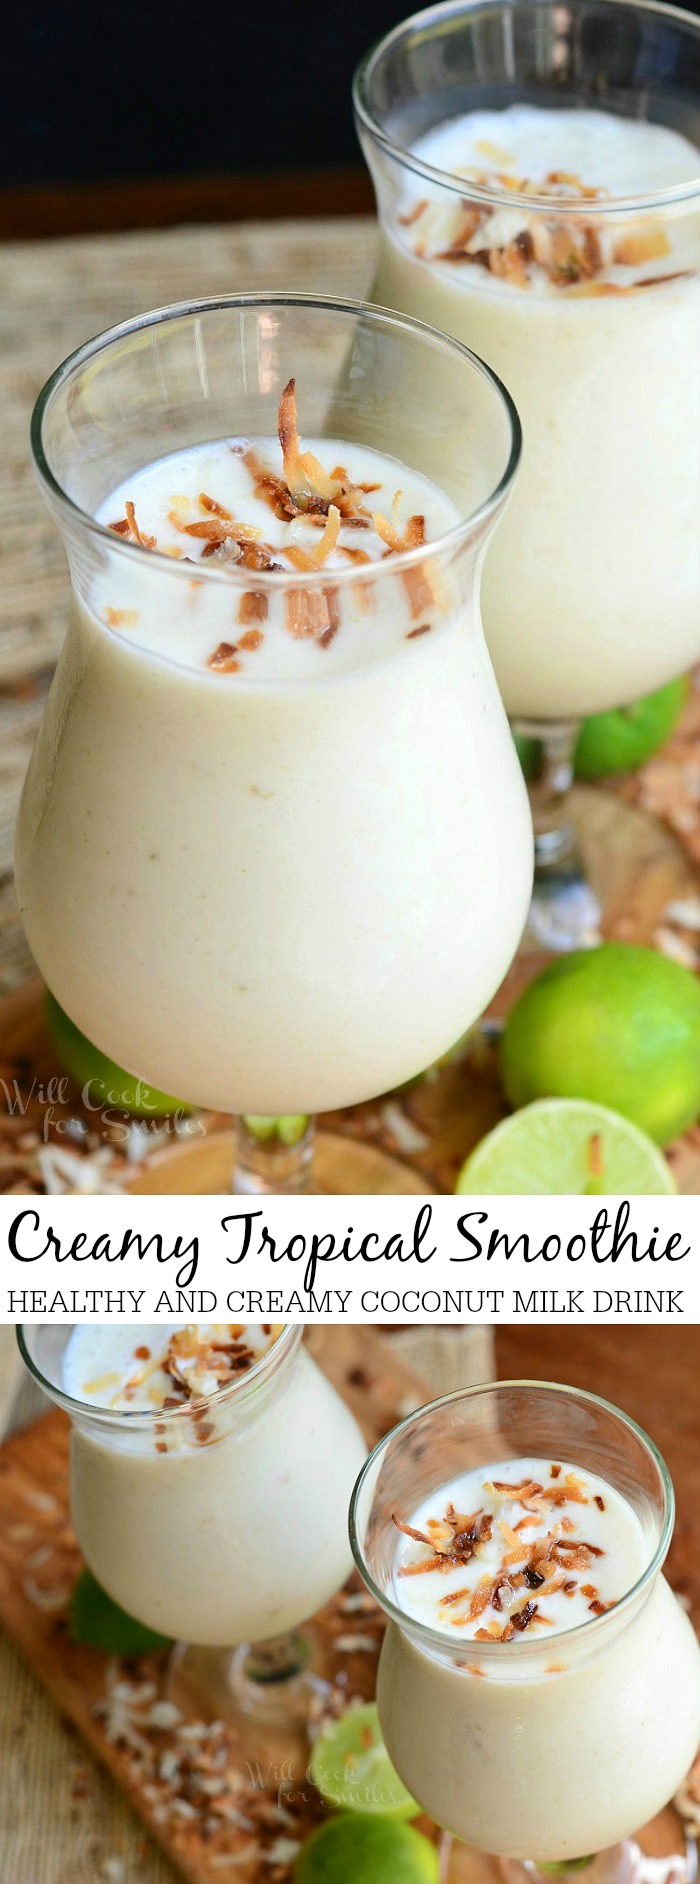 Recipes - Healthy Creamy Tropical Smoothie from willcookforsmiles.com